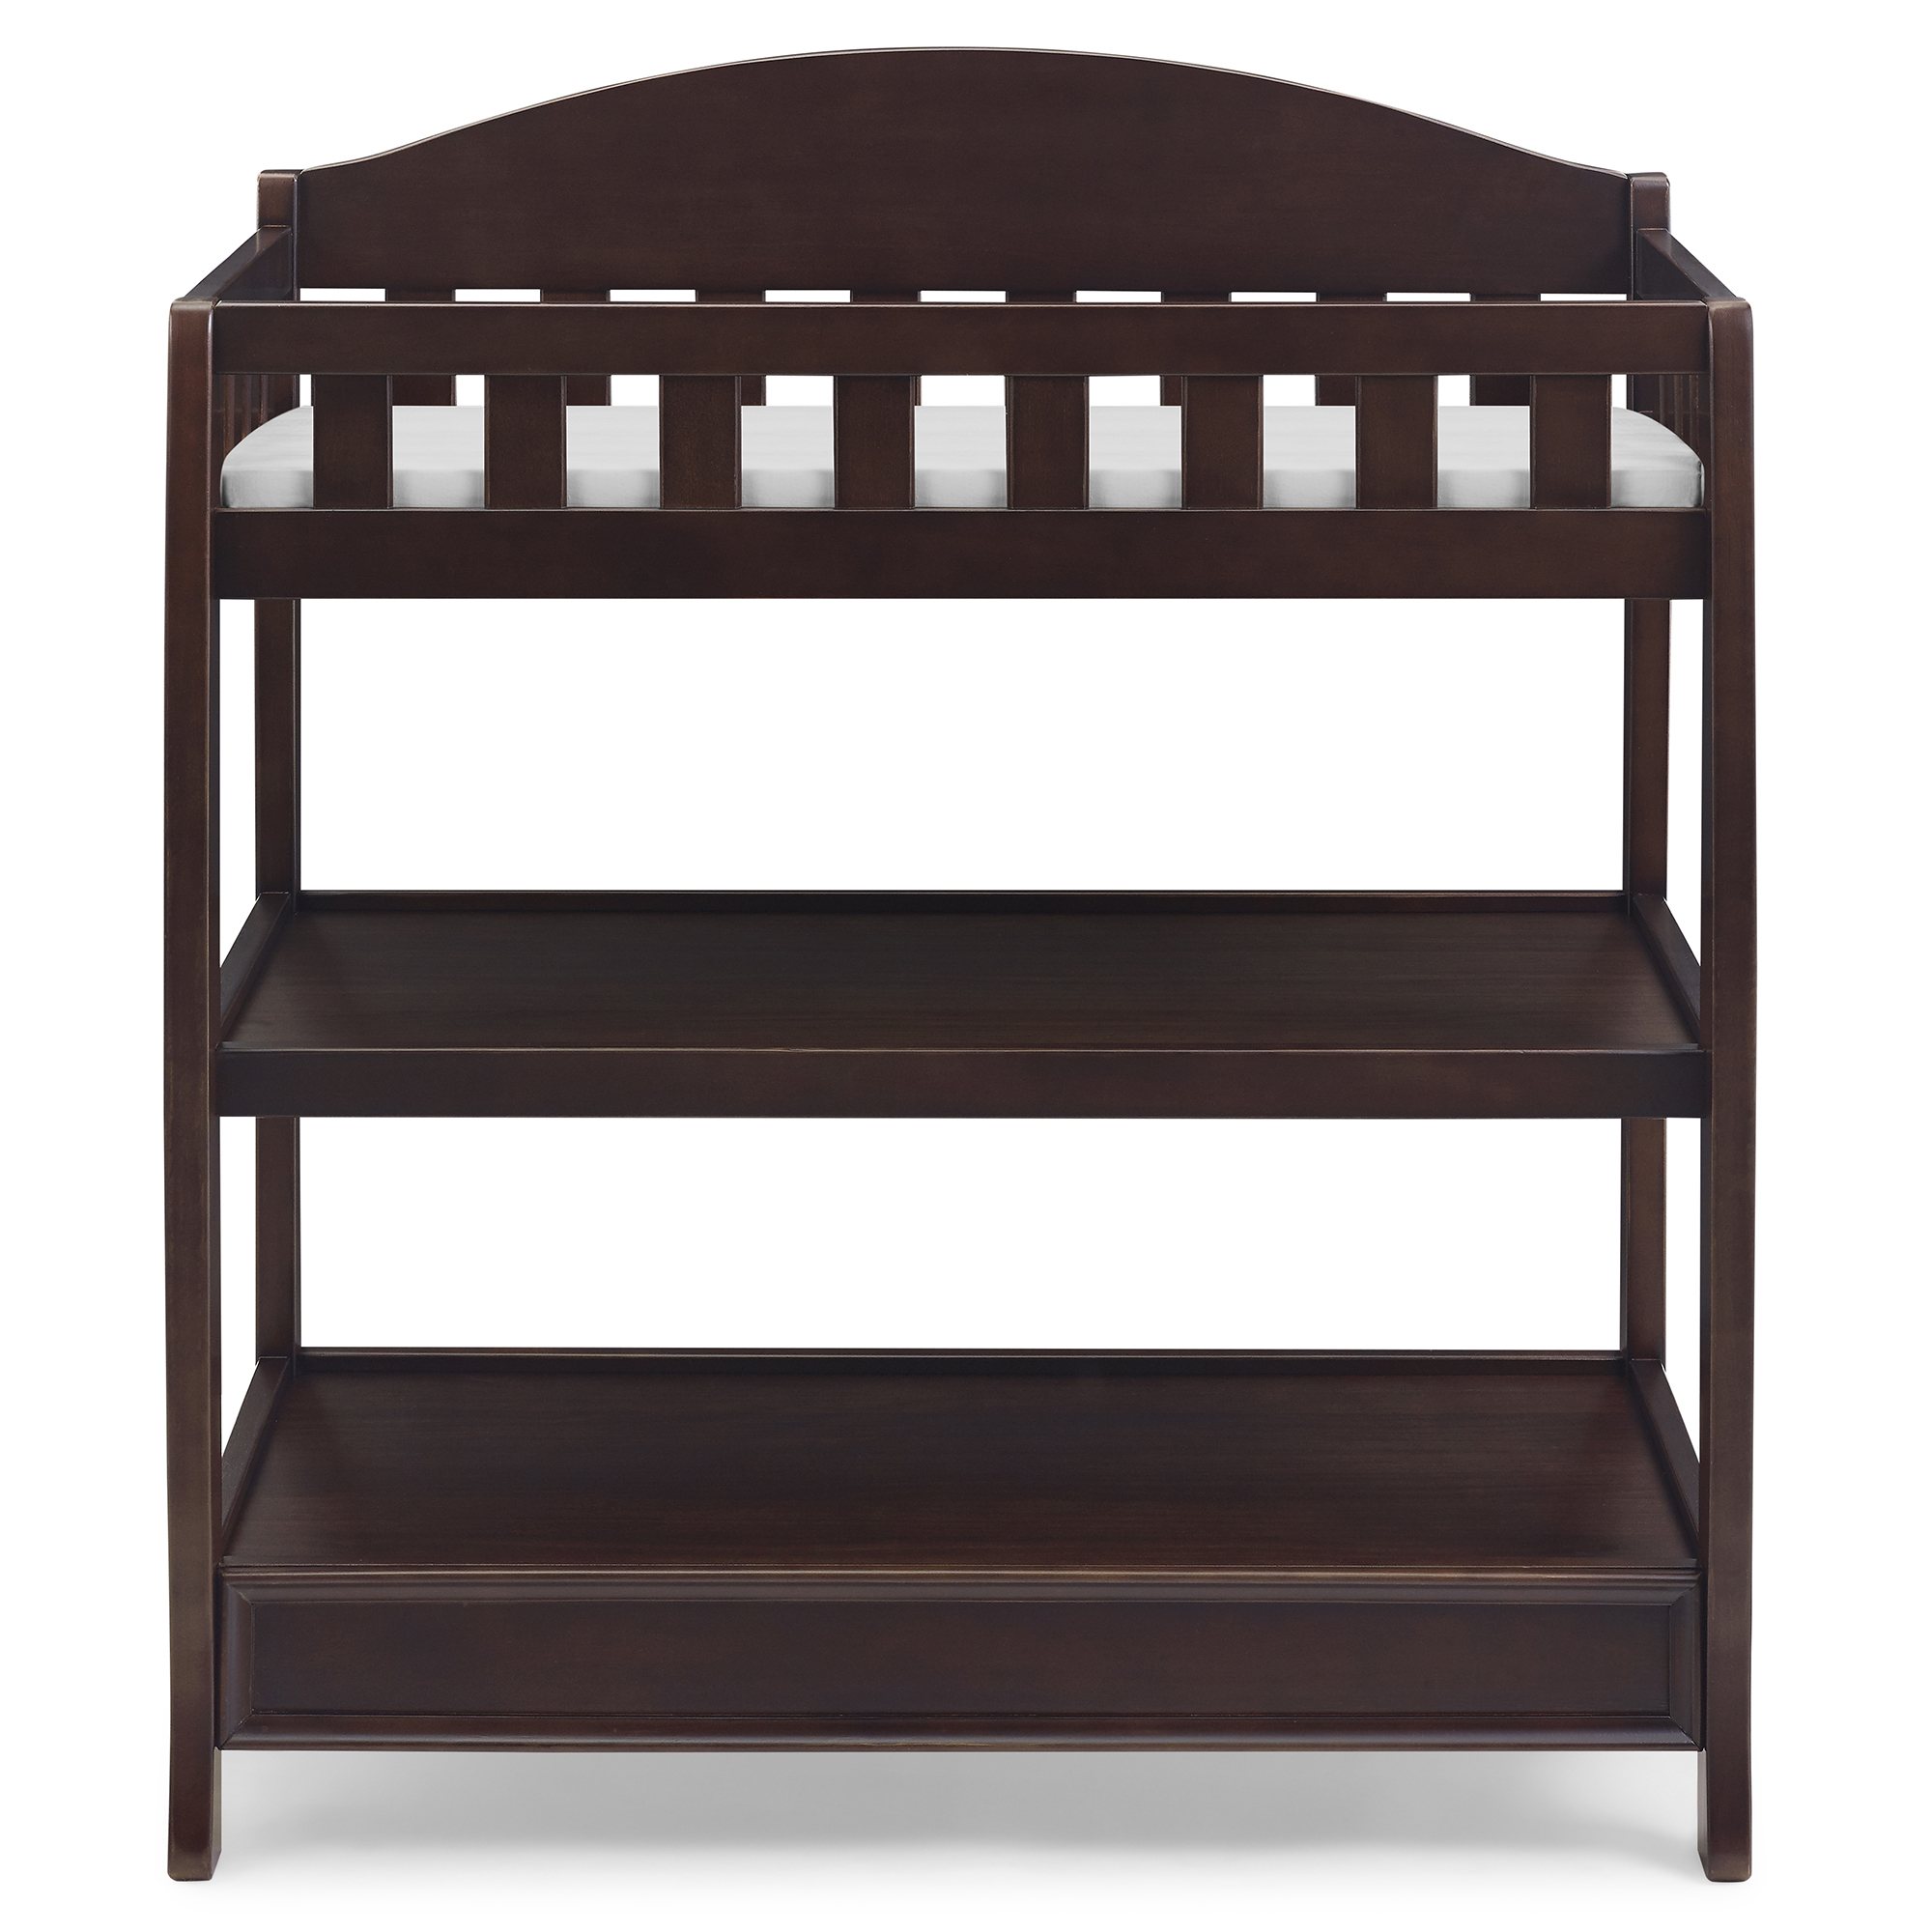 Delta Children Wilmington Changing Table with Pad, Walnut Espresso - image 3 of 5